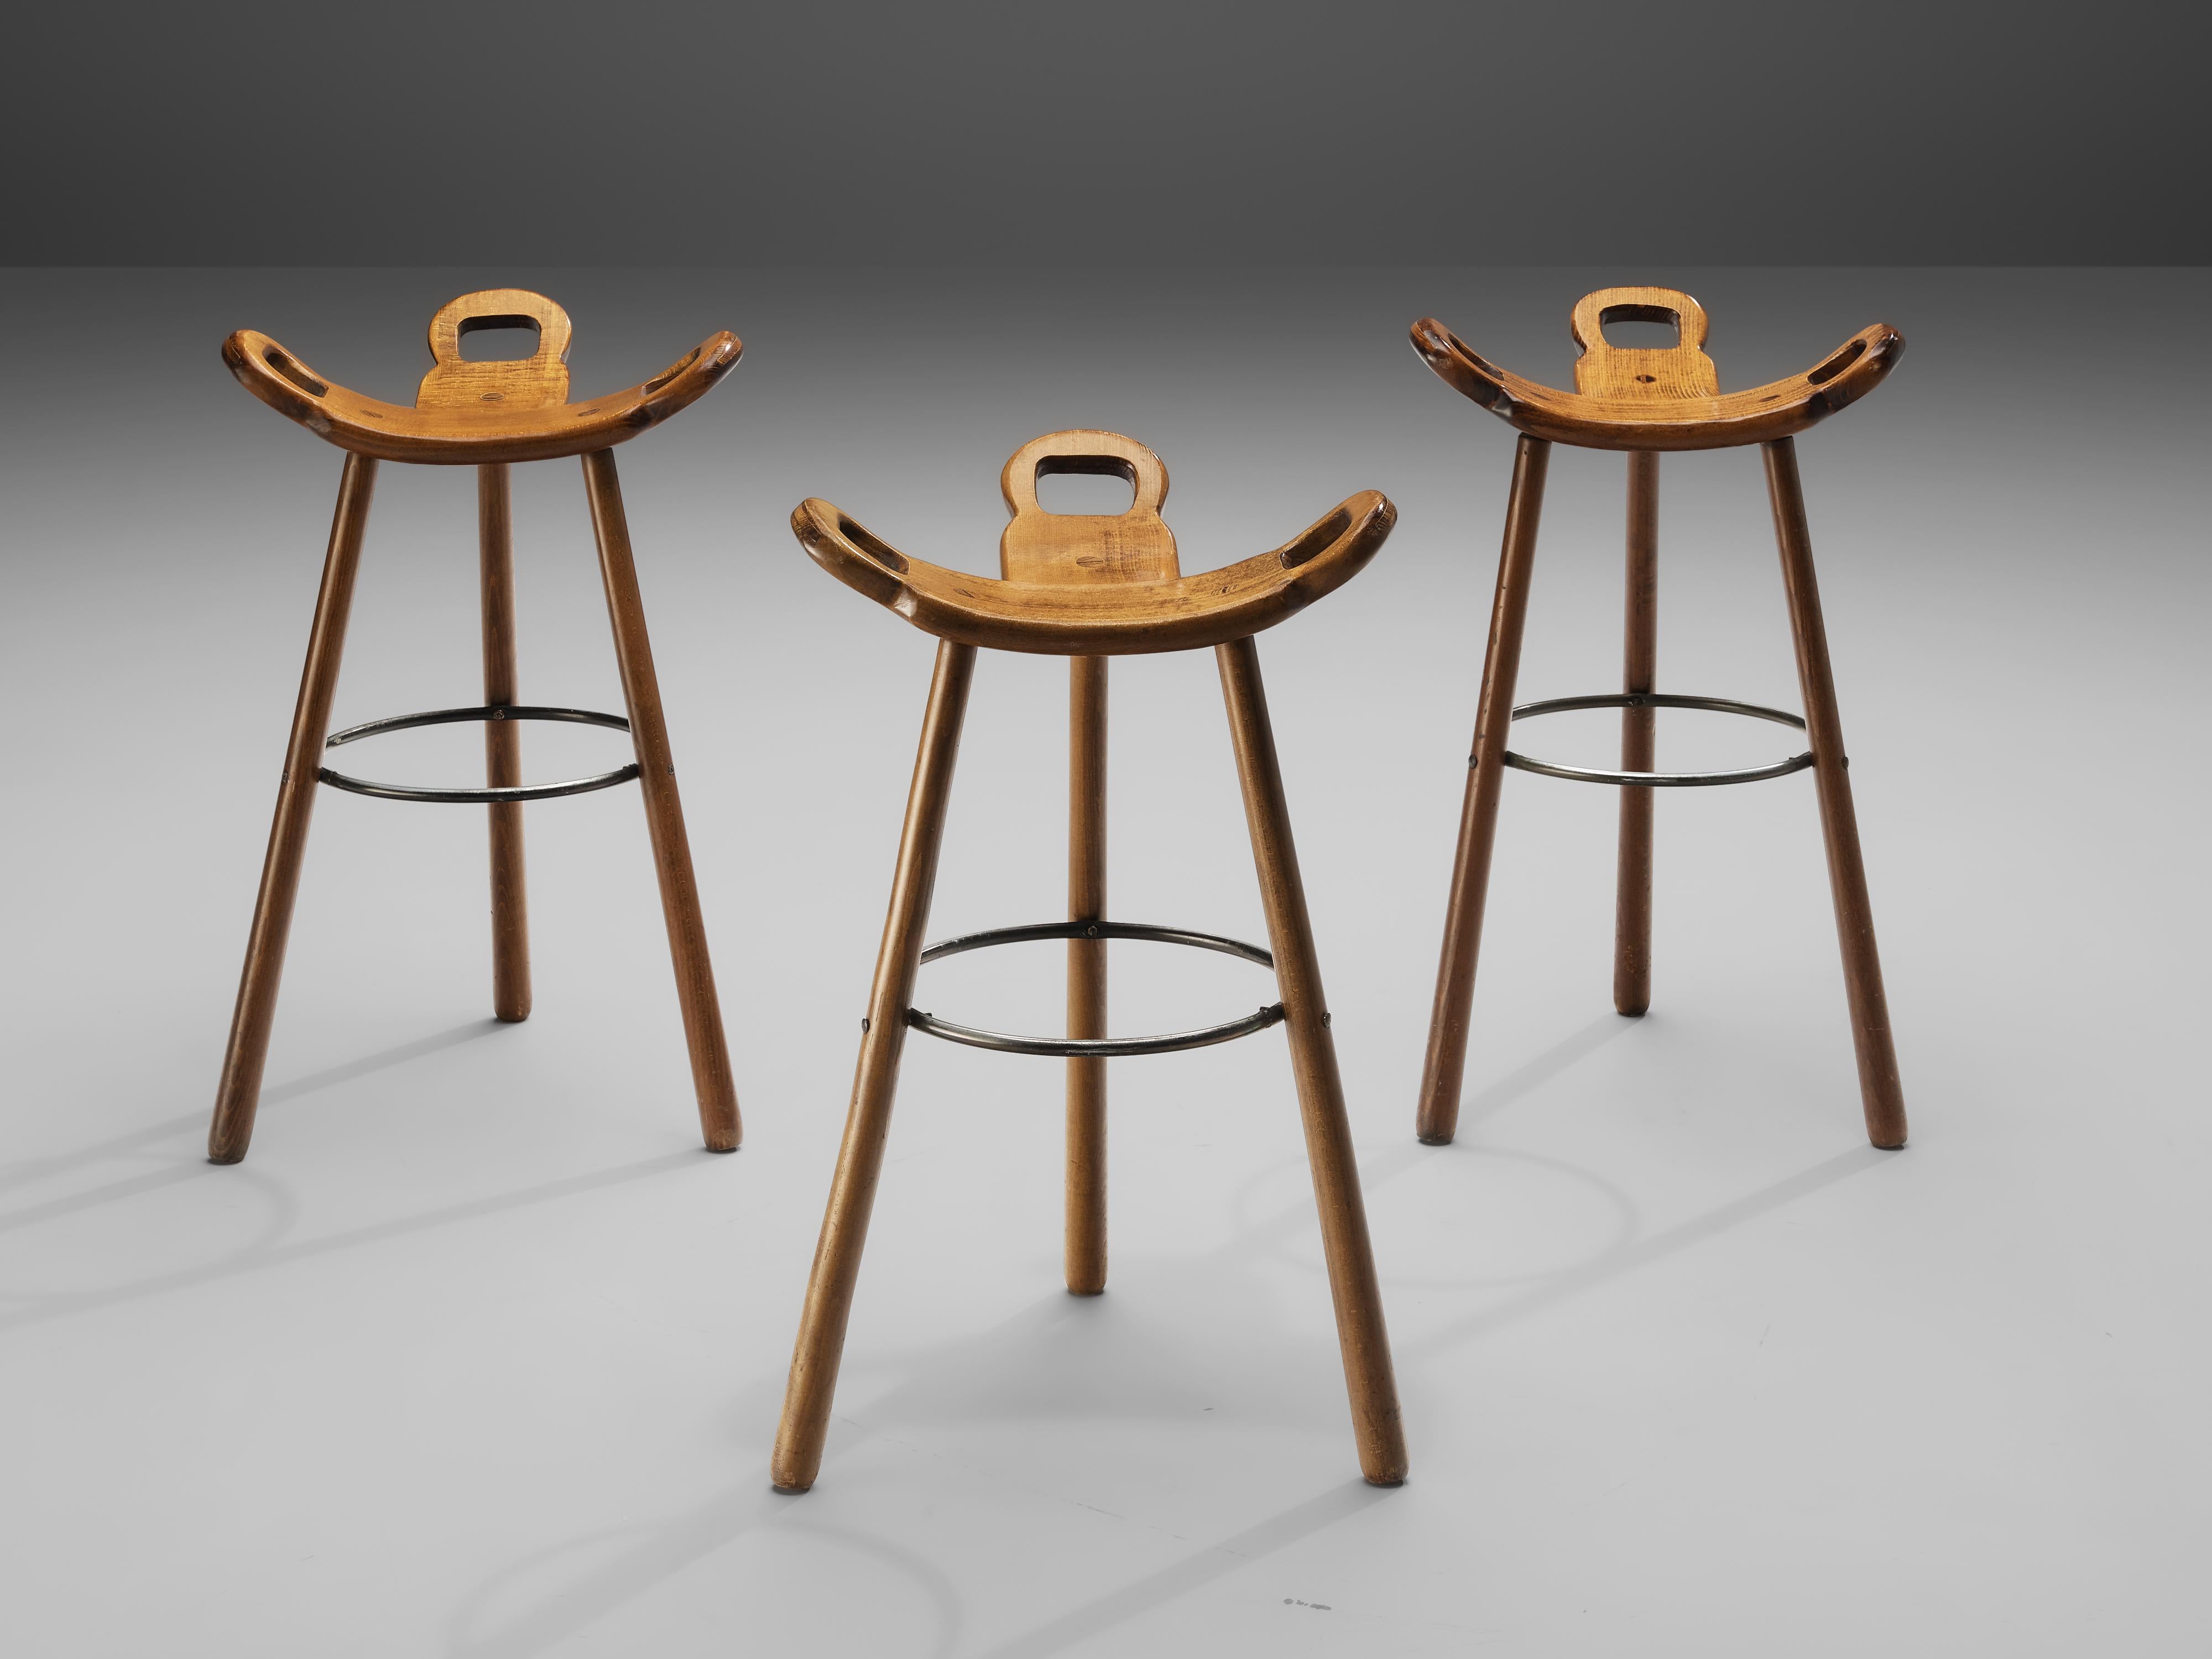 Set of three 'Brutalist' or 'Marbella' bar stools, stained beech, metal, Spain, 1970s

Brutalist bar stools in stained beech. The eye-catching part is the seating which is a curved T-shape with three handles. The handles are not only an interesting